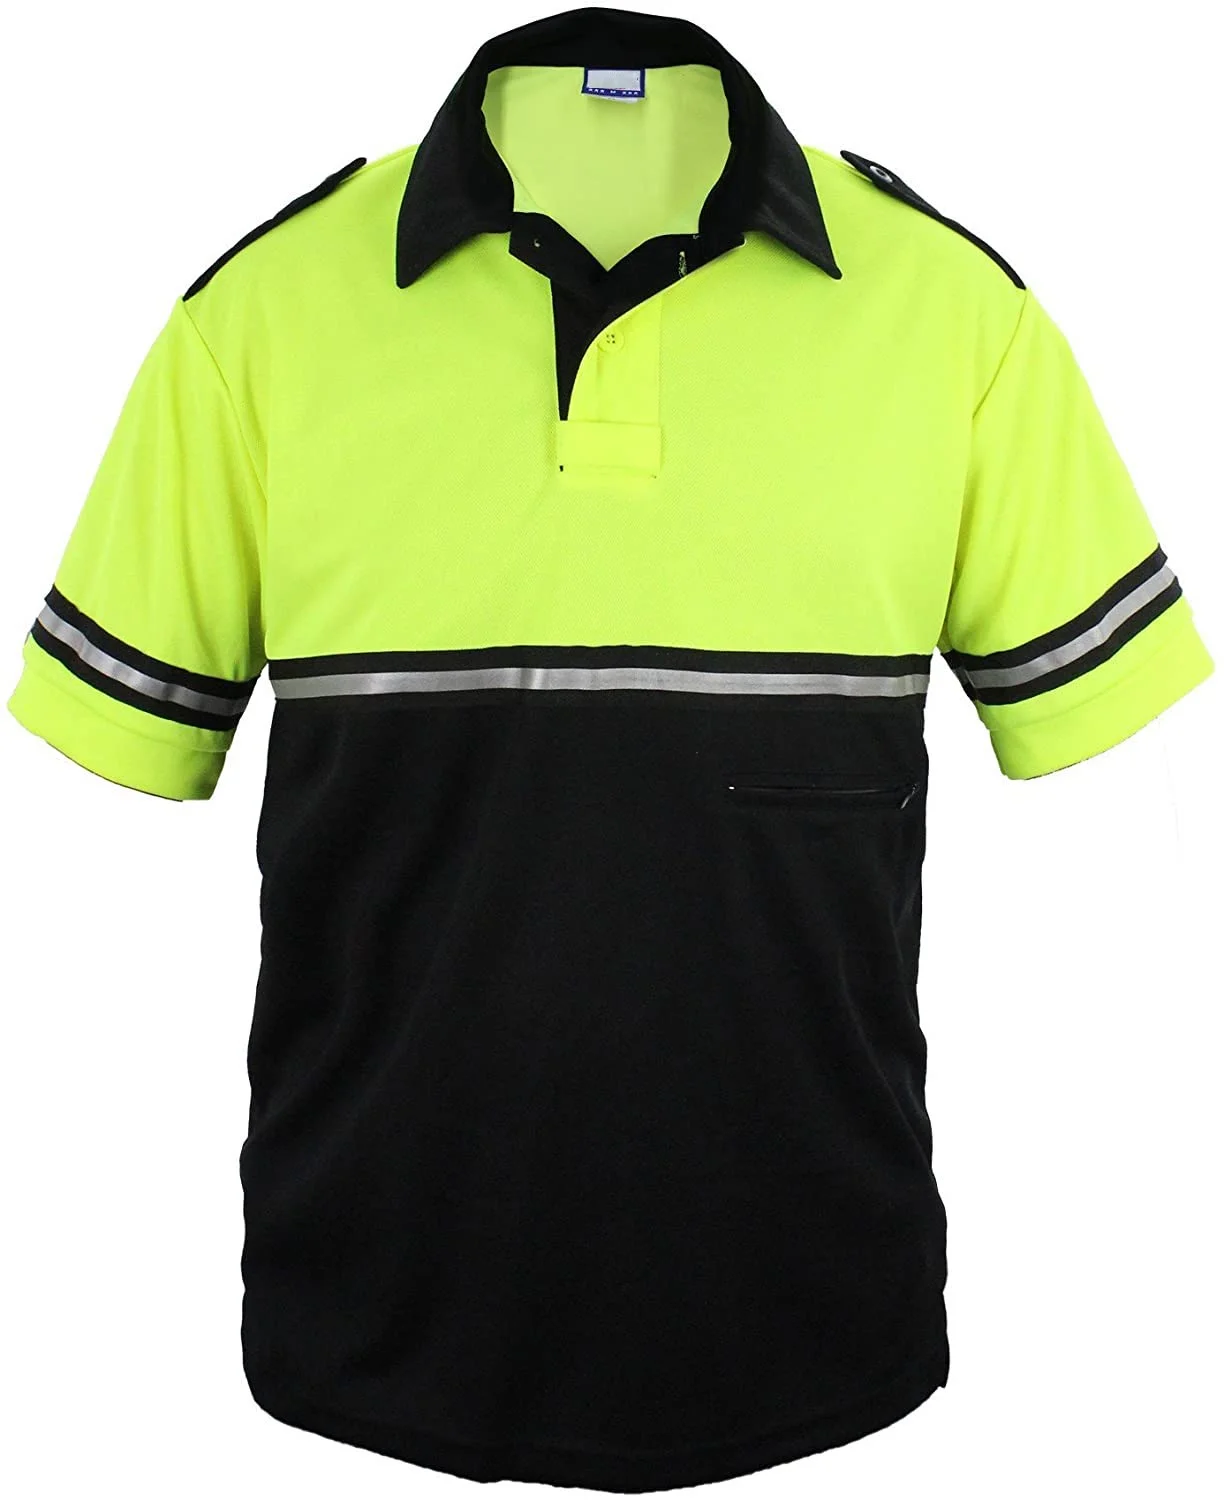 Two Tone Bike Patrol Shirt With Reflective Stripes from Bnagladesh